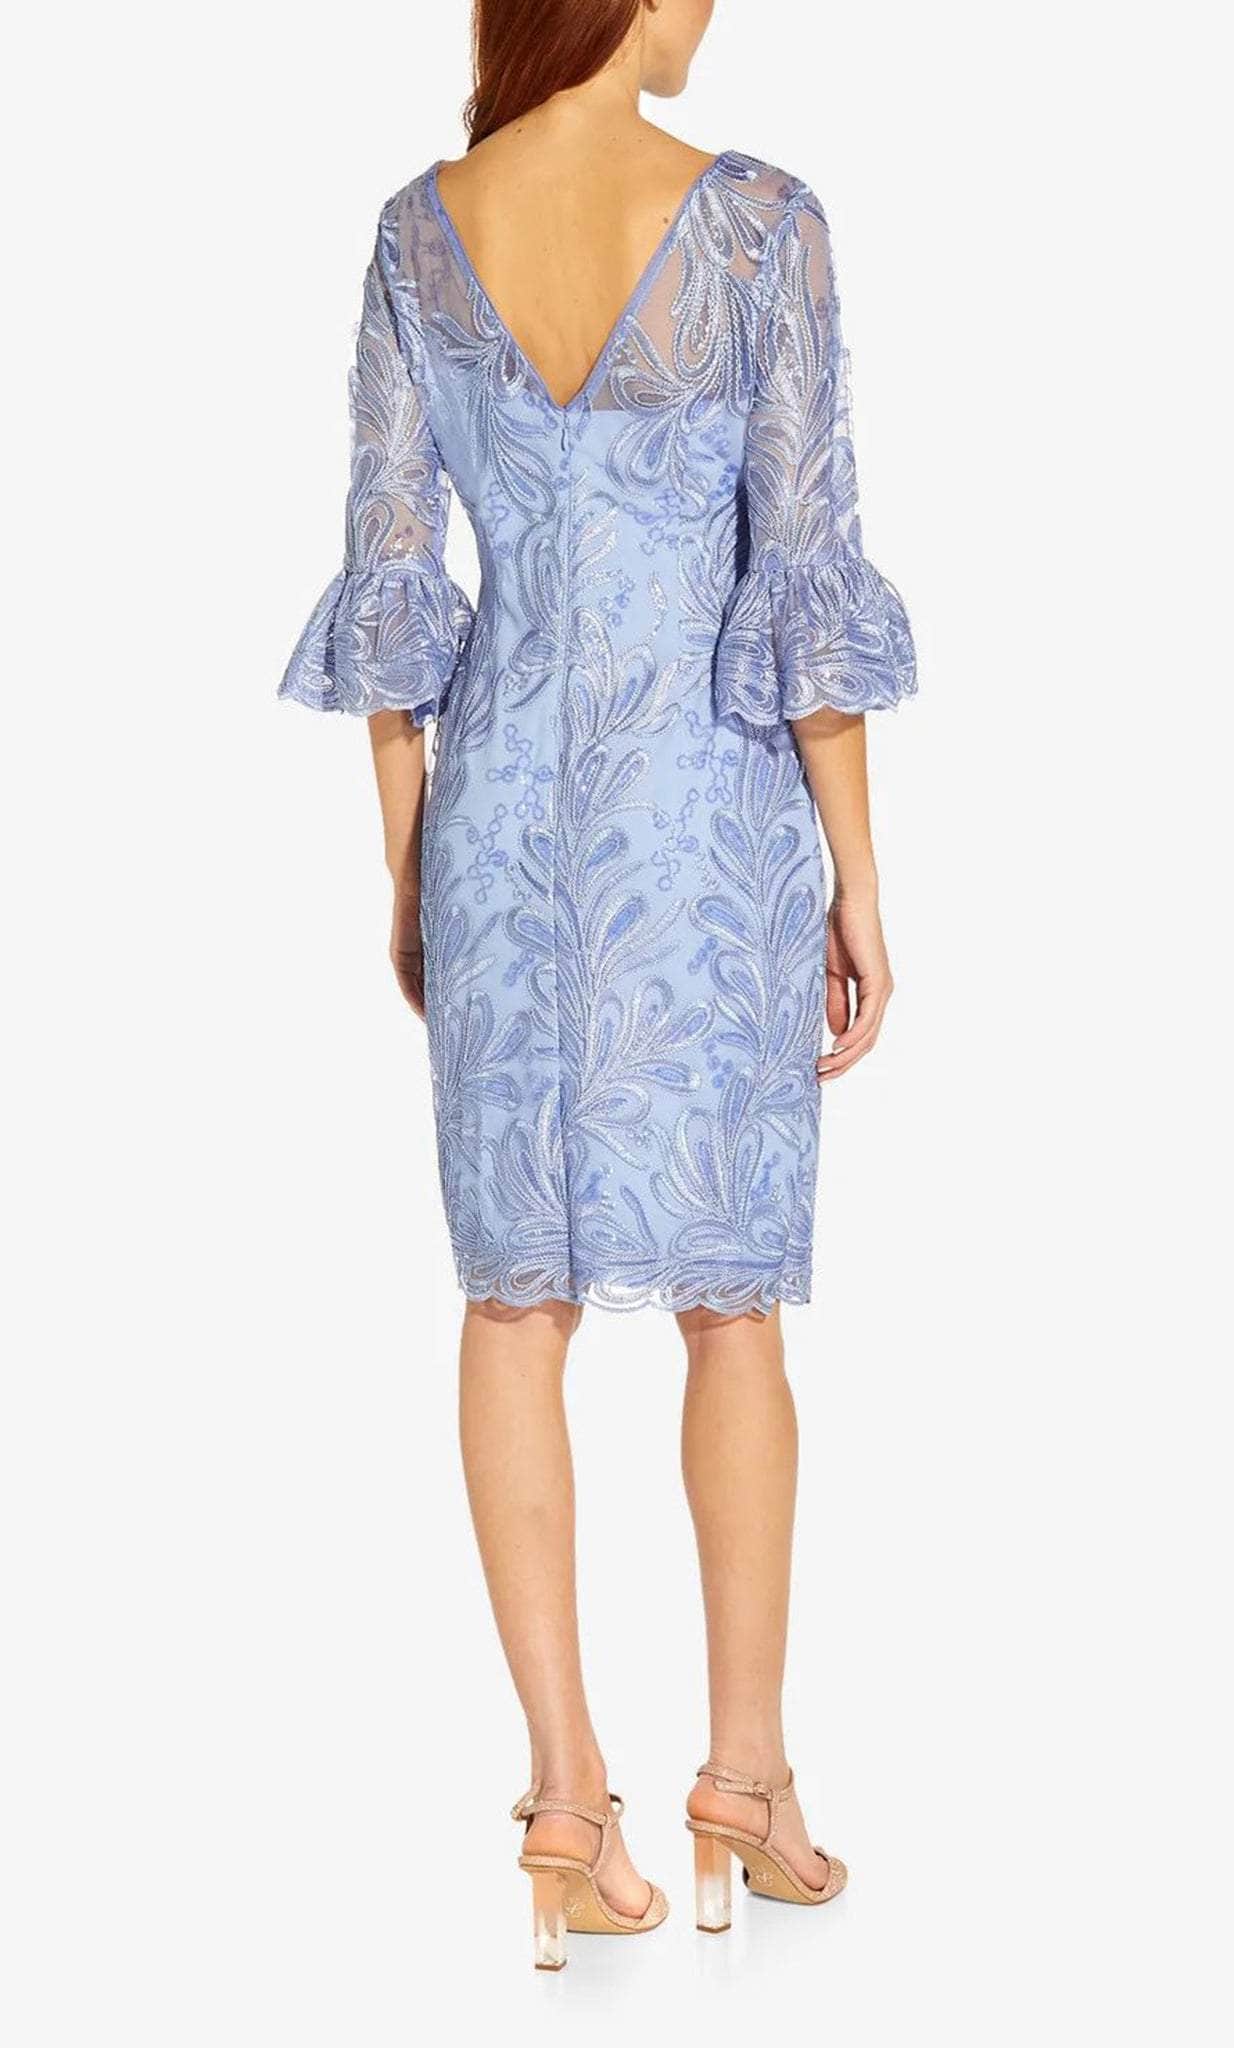 Adrianna Papell AP1D104722 - Embroidered Bell Sleeve Cocktail Dress Cocktail Dresses